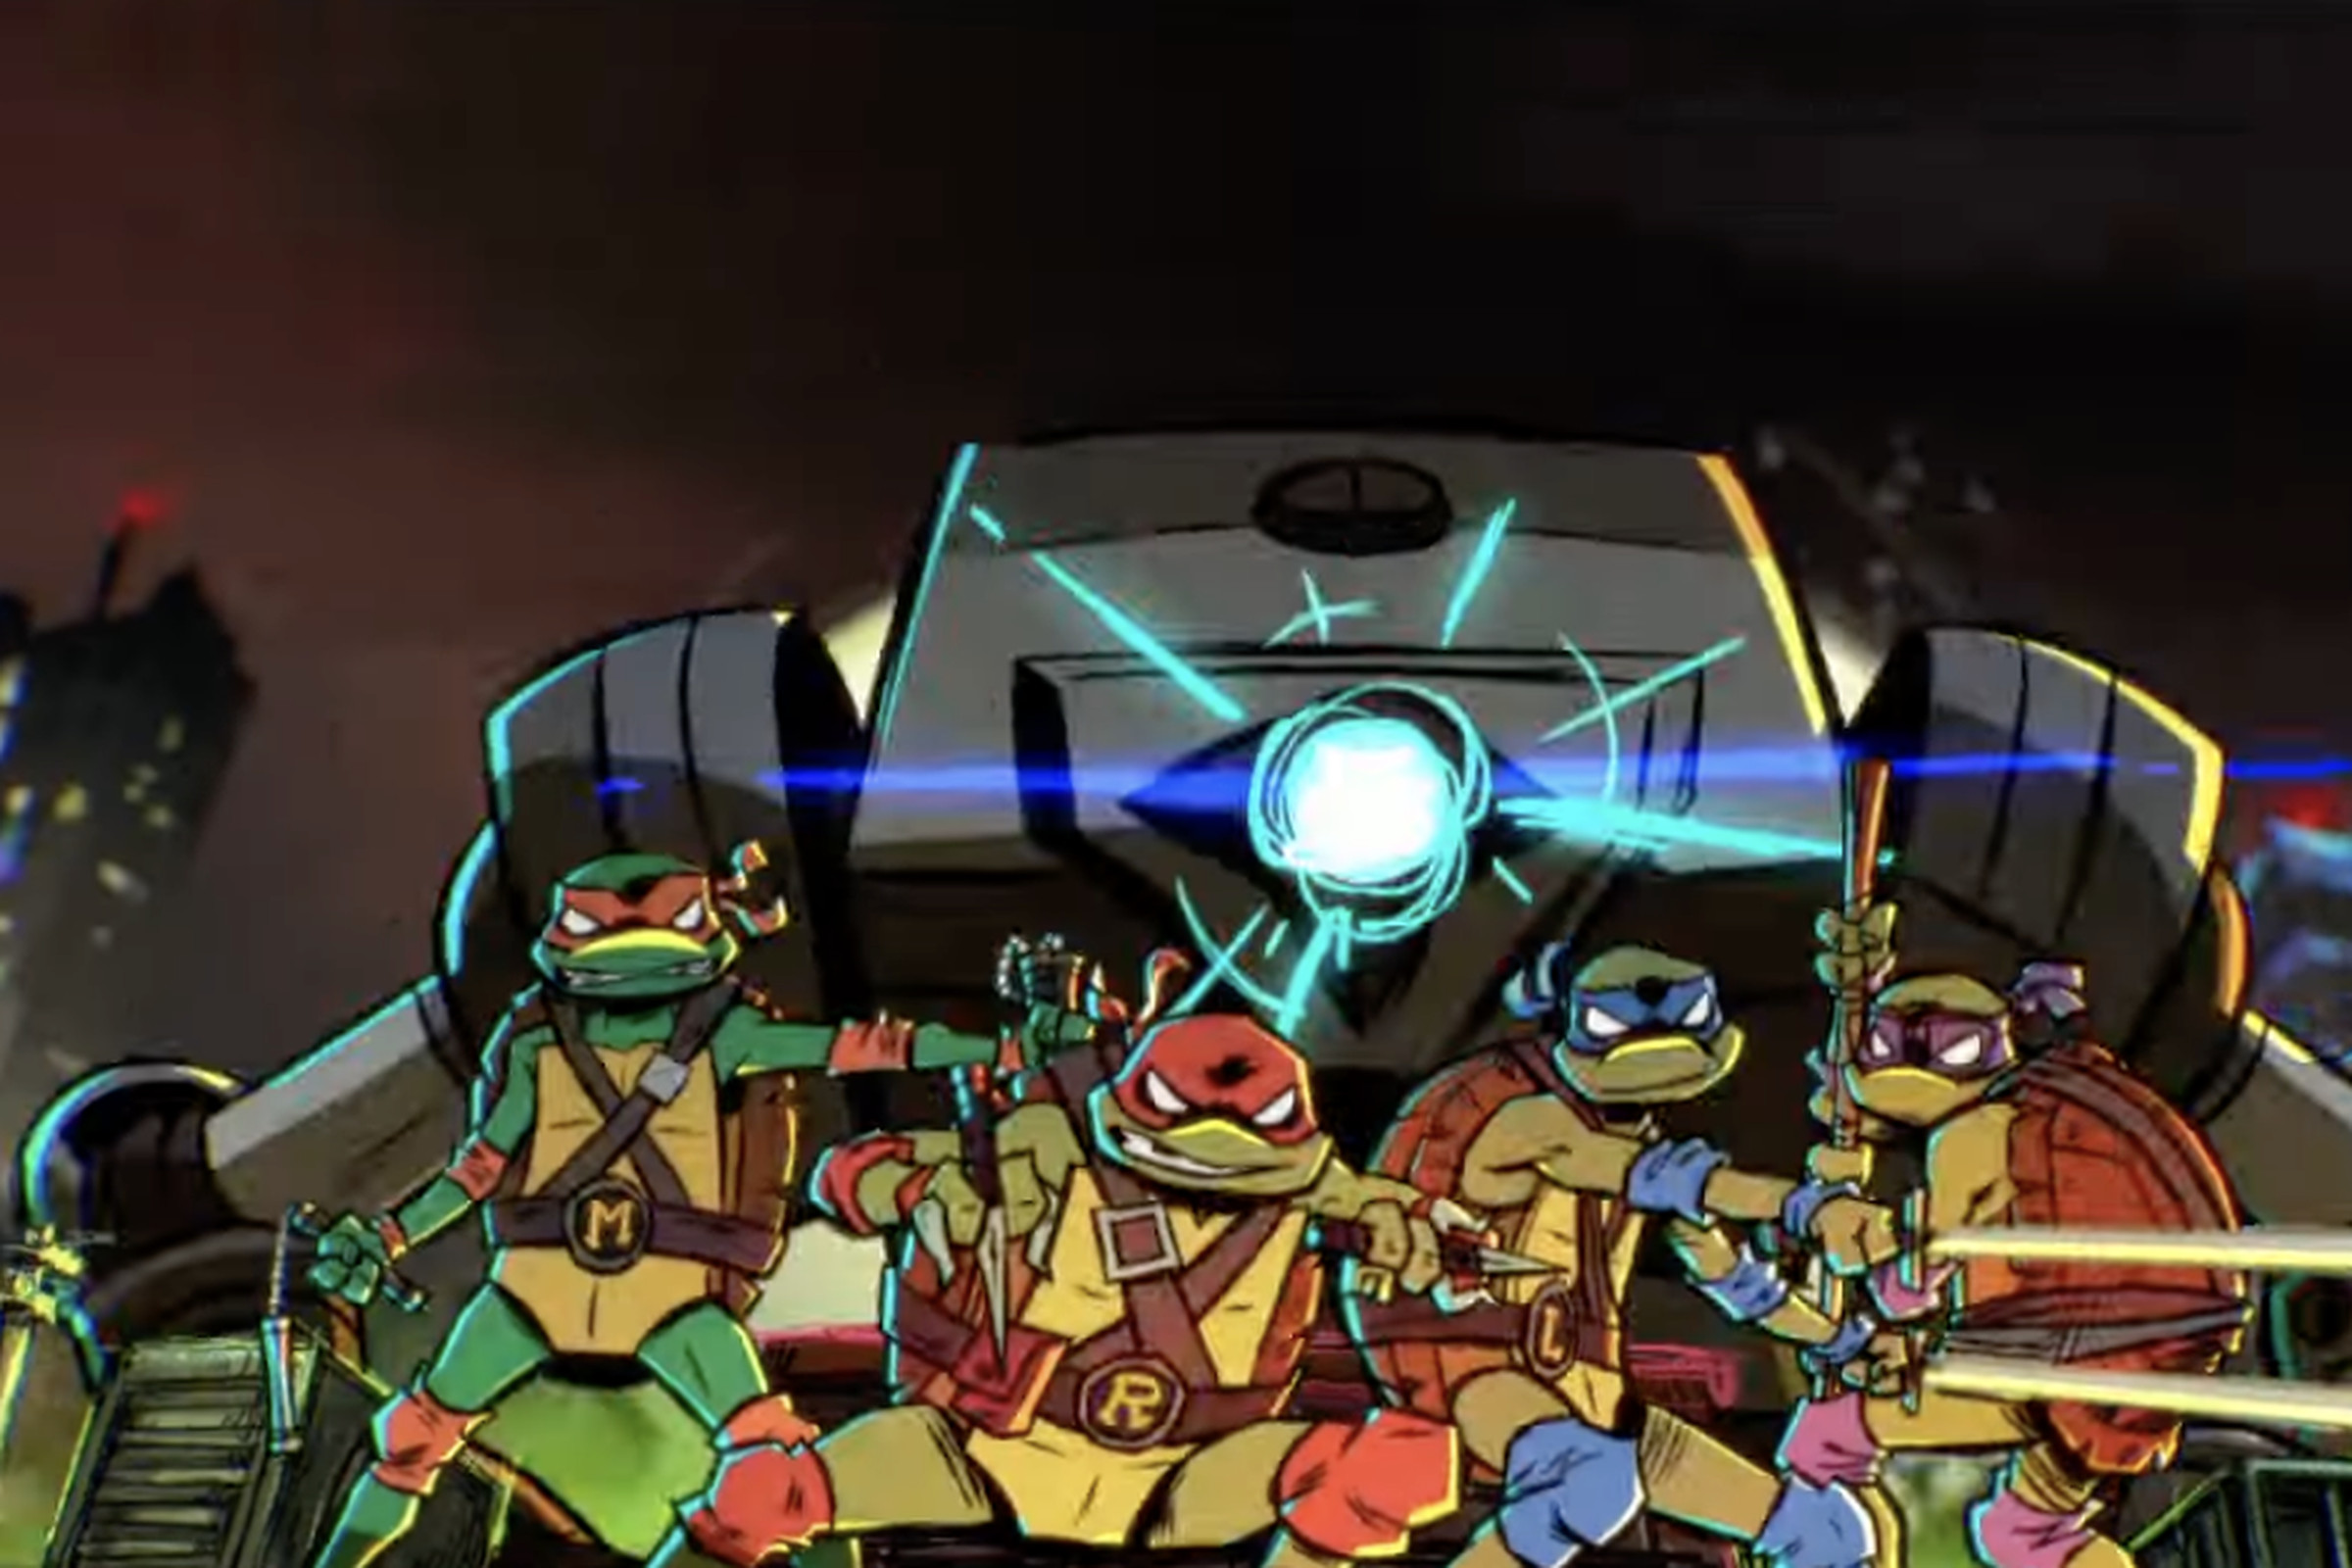 The four turtles stand in fighting poses while a giant robot rises up from behind them.